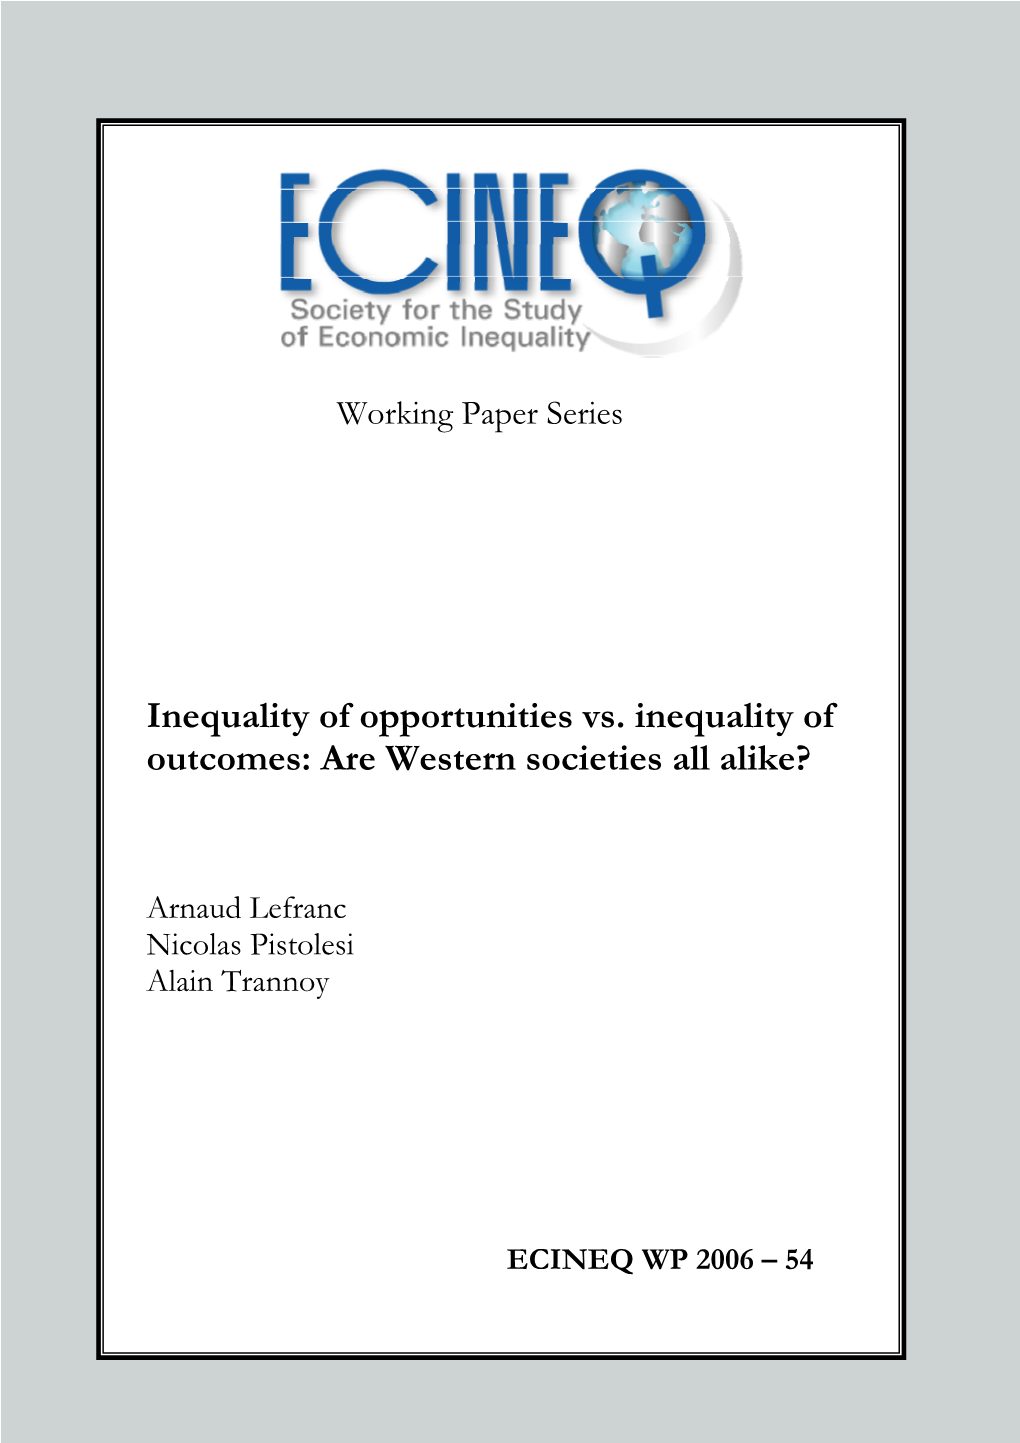 Inequality of Opportunities Vs. Inequality of Outcomes: Are Western Societies All Alike?